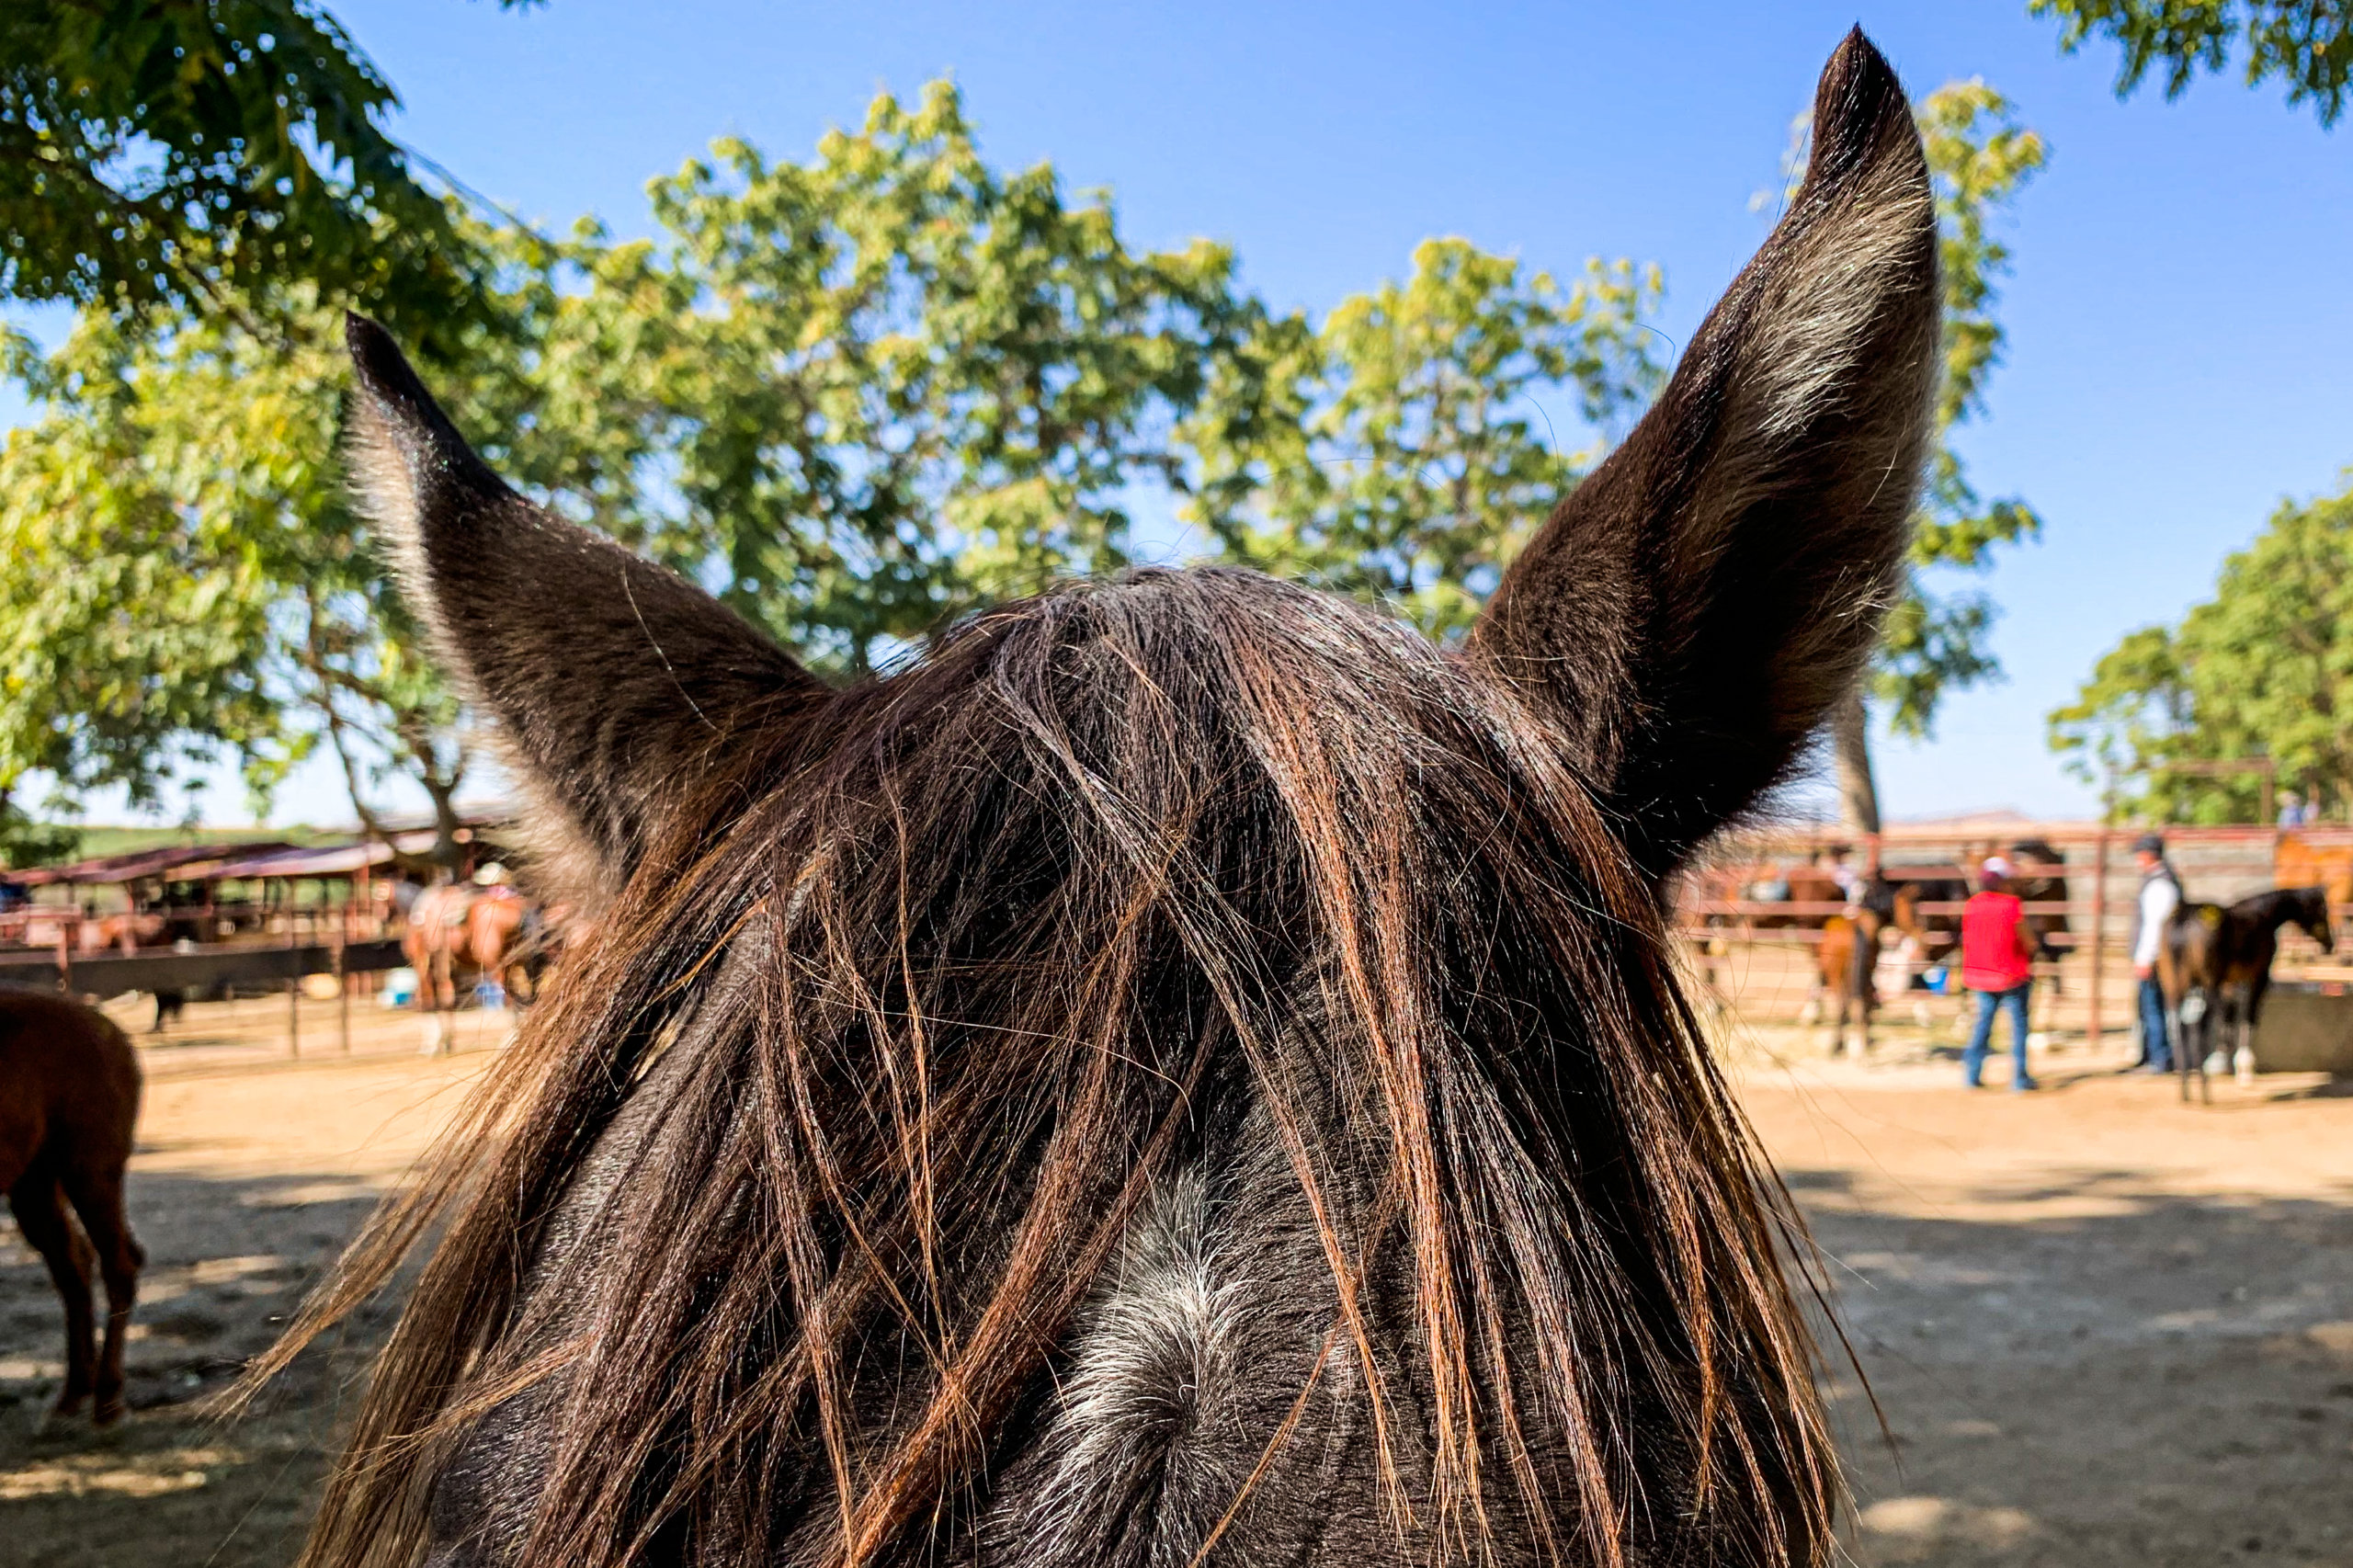 Close-up of the ears and bangs of a horse